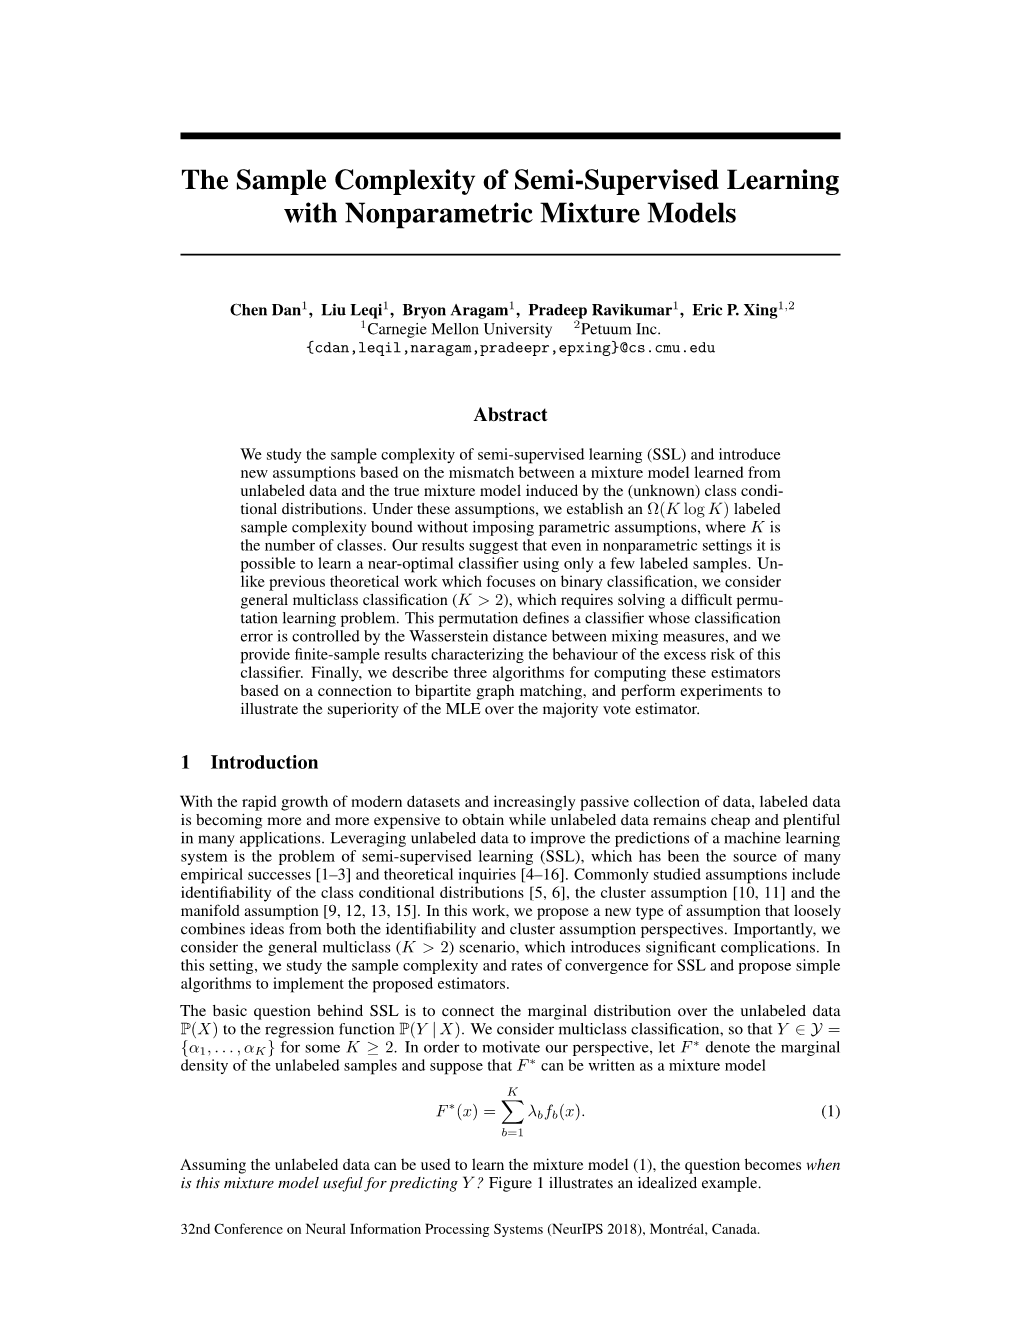 The Sample Complexity of Semi-Supervised Learning with Nonparametric Mixture Models